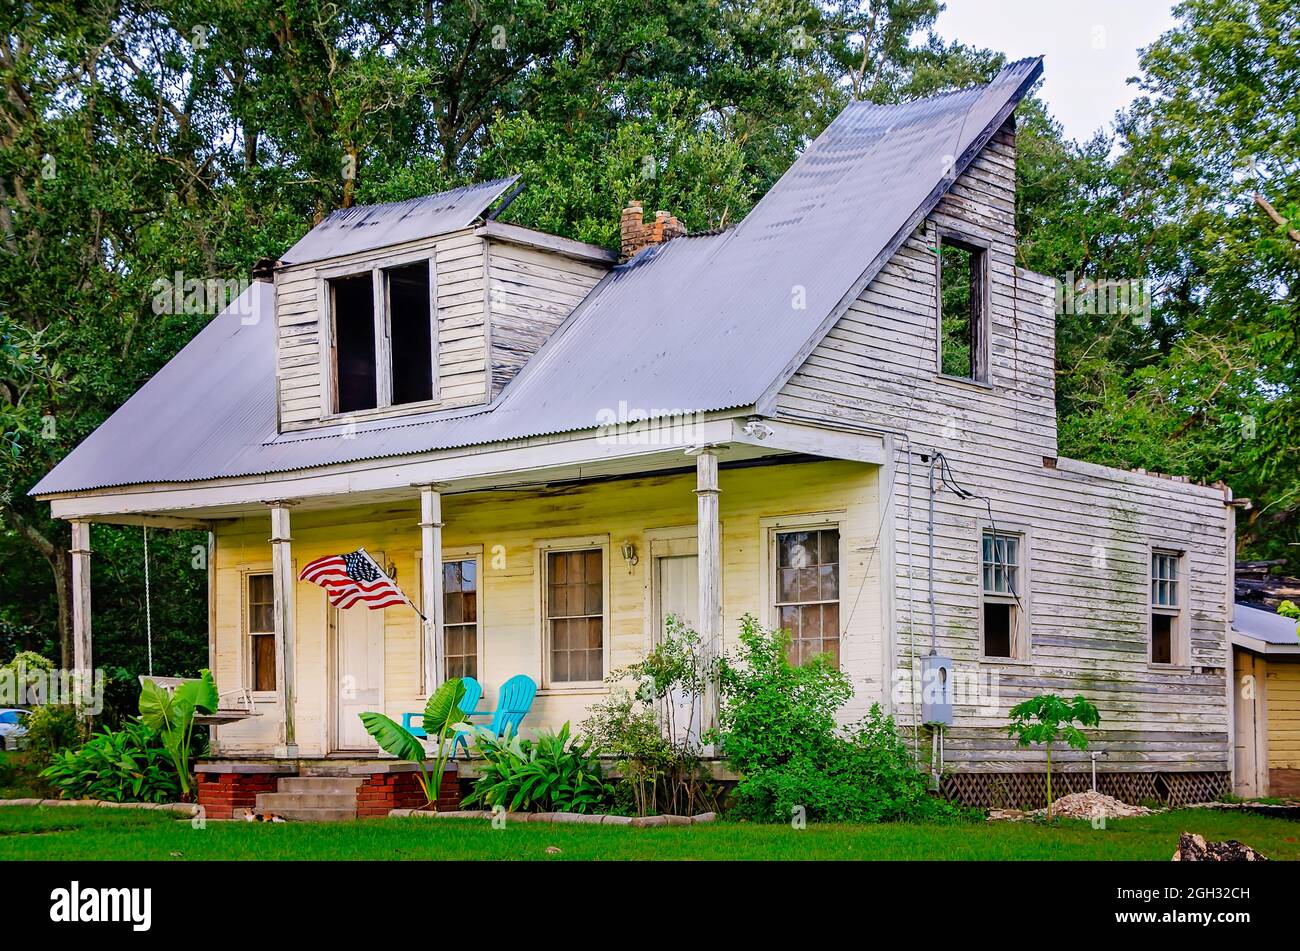 An American flag flies at a fire-damaged house, Aug. 31, 2021, in Bayou La Batre, Alabama. The Creole Plantation-style home is being renovated. Stock Photo